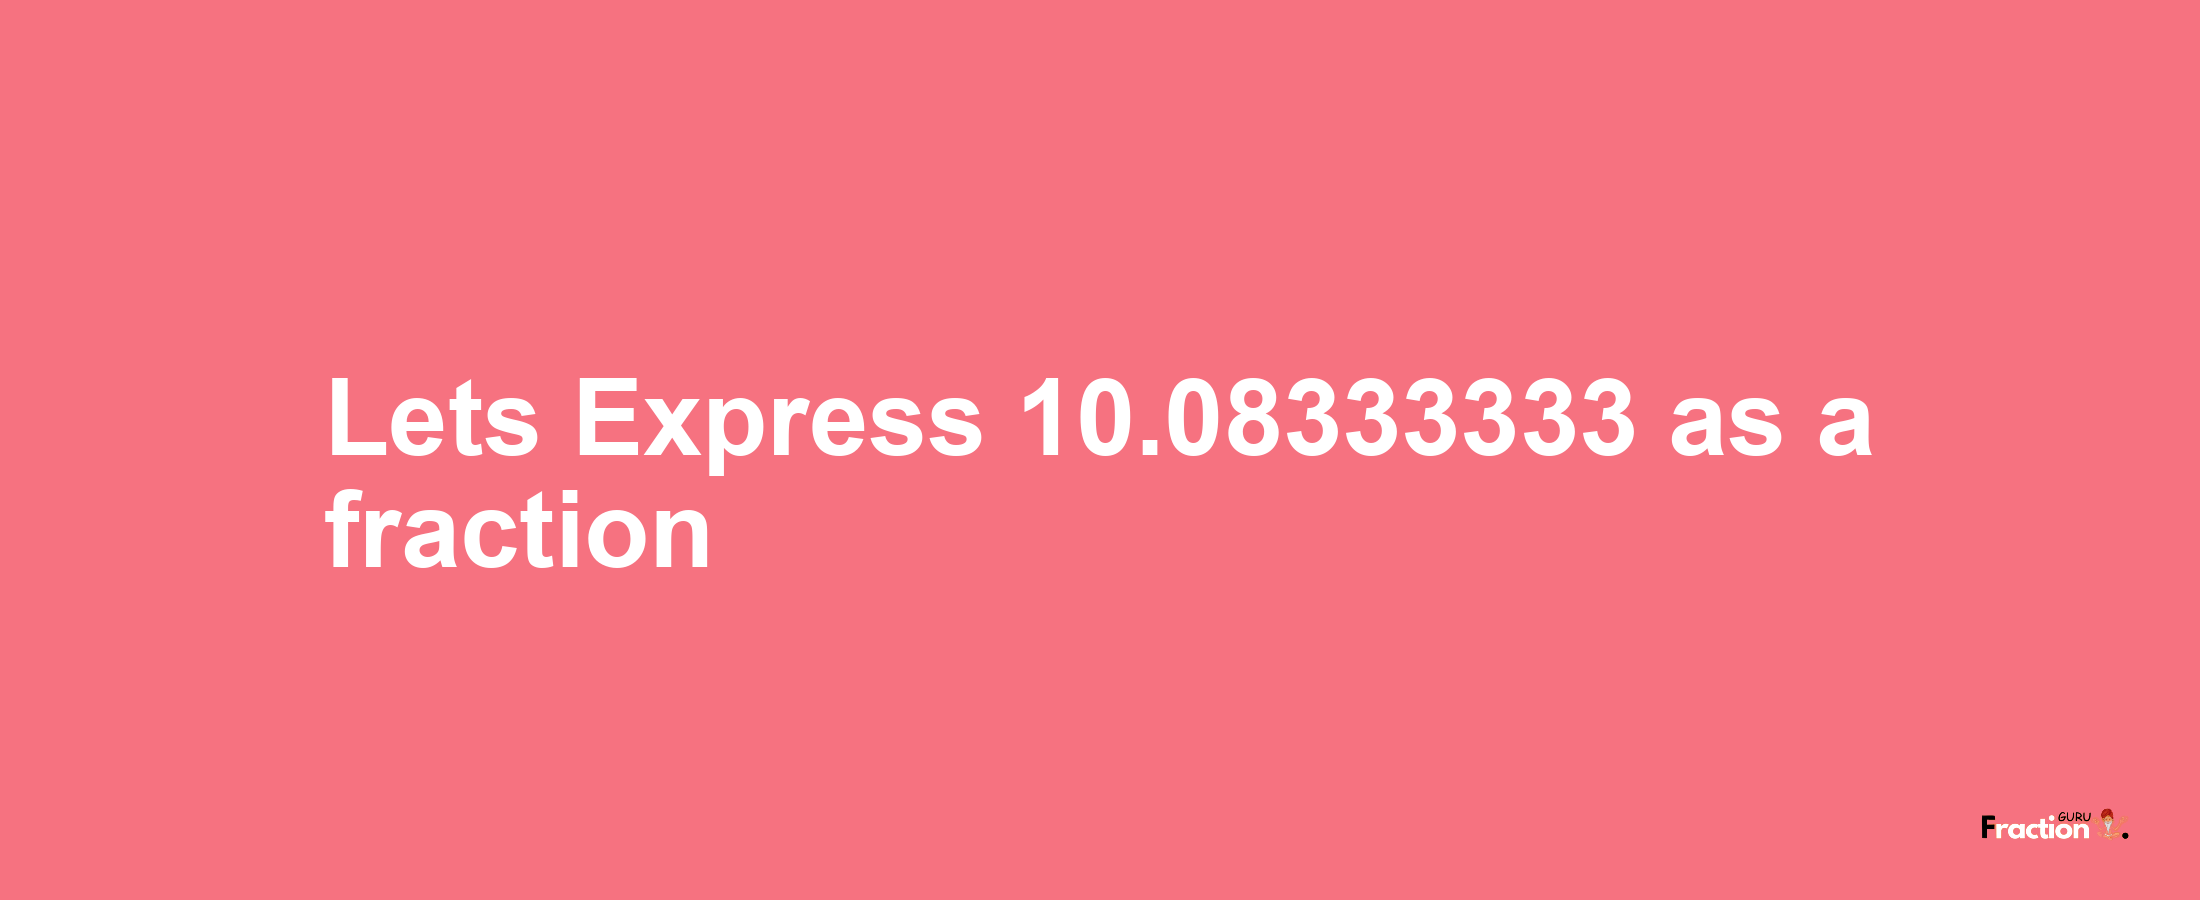 Lets Express 10.08333333 as afraction